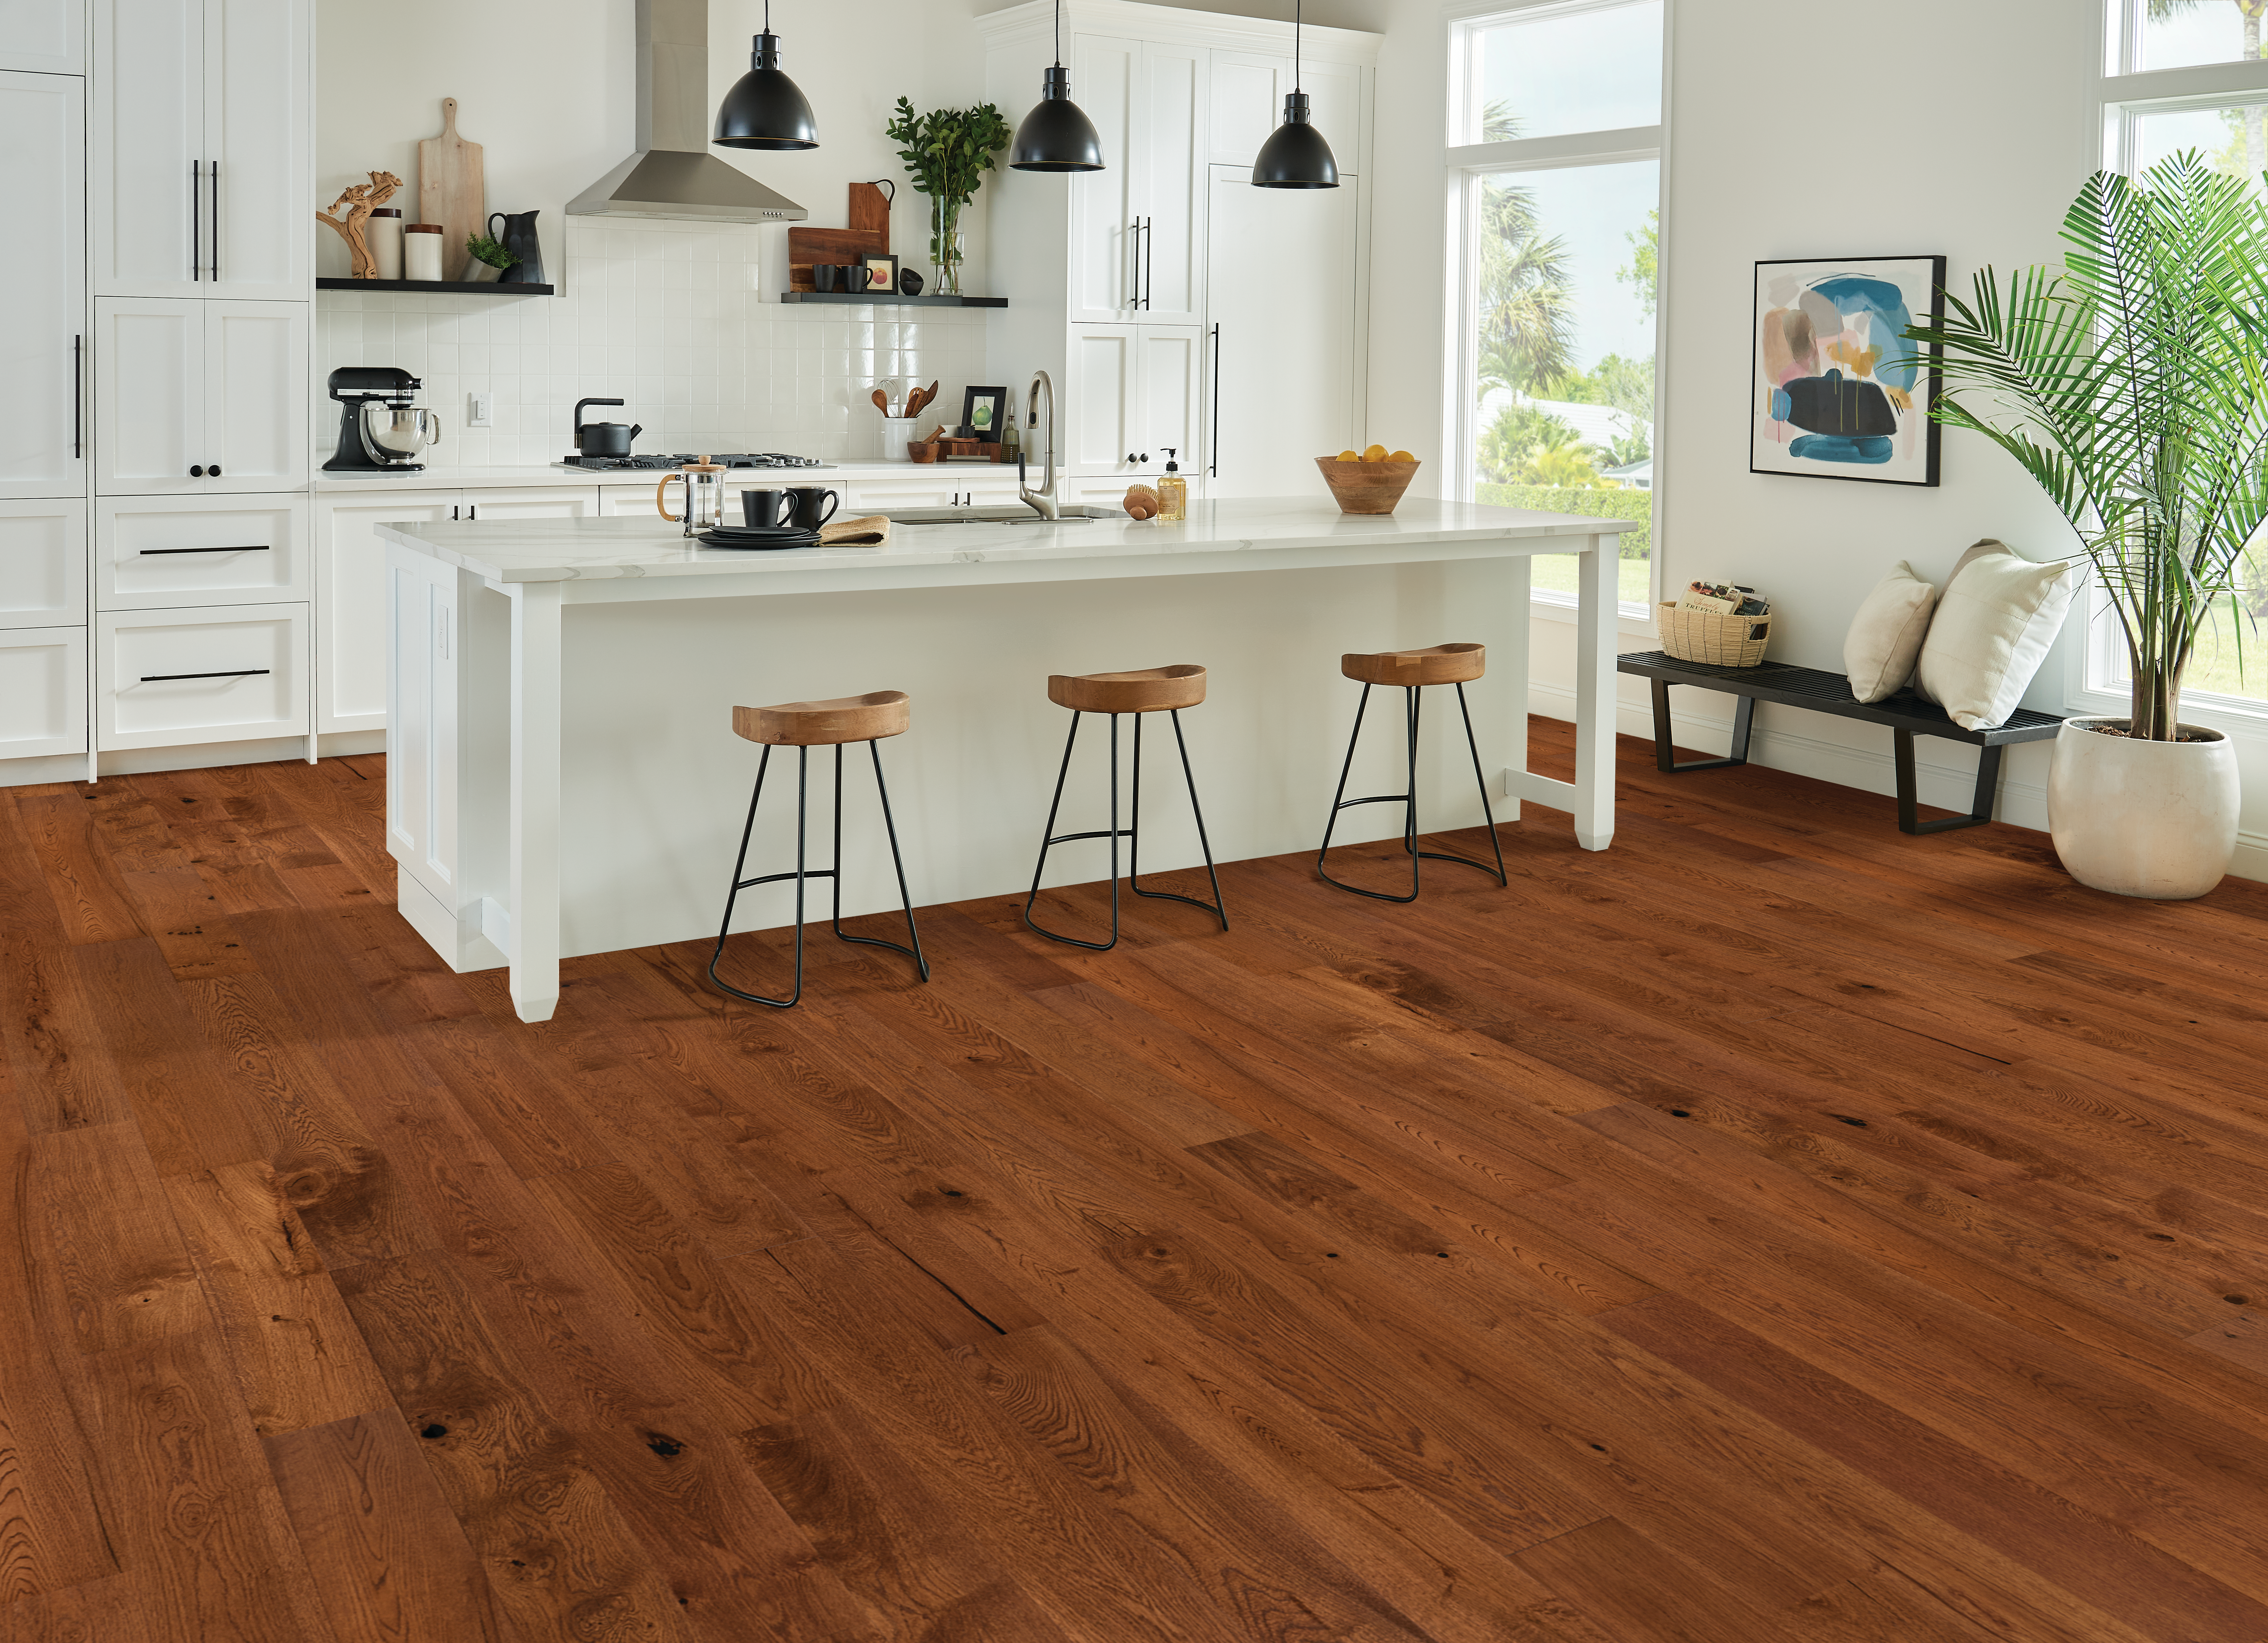 TimberBrushed Deep Etched Dusty Ranch Engineered Hardwood EAKTB75L407